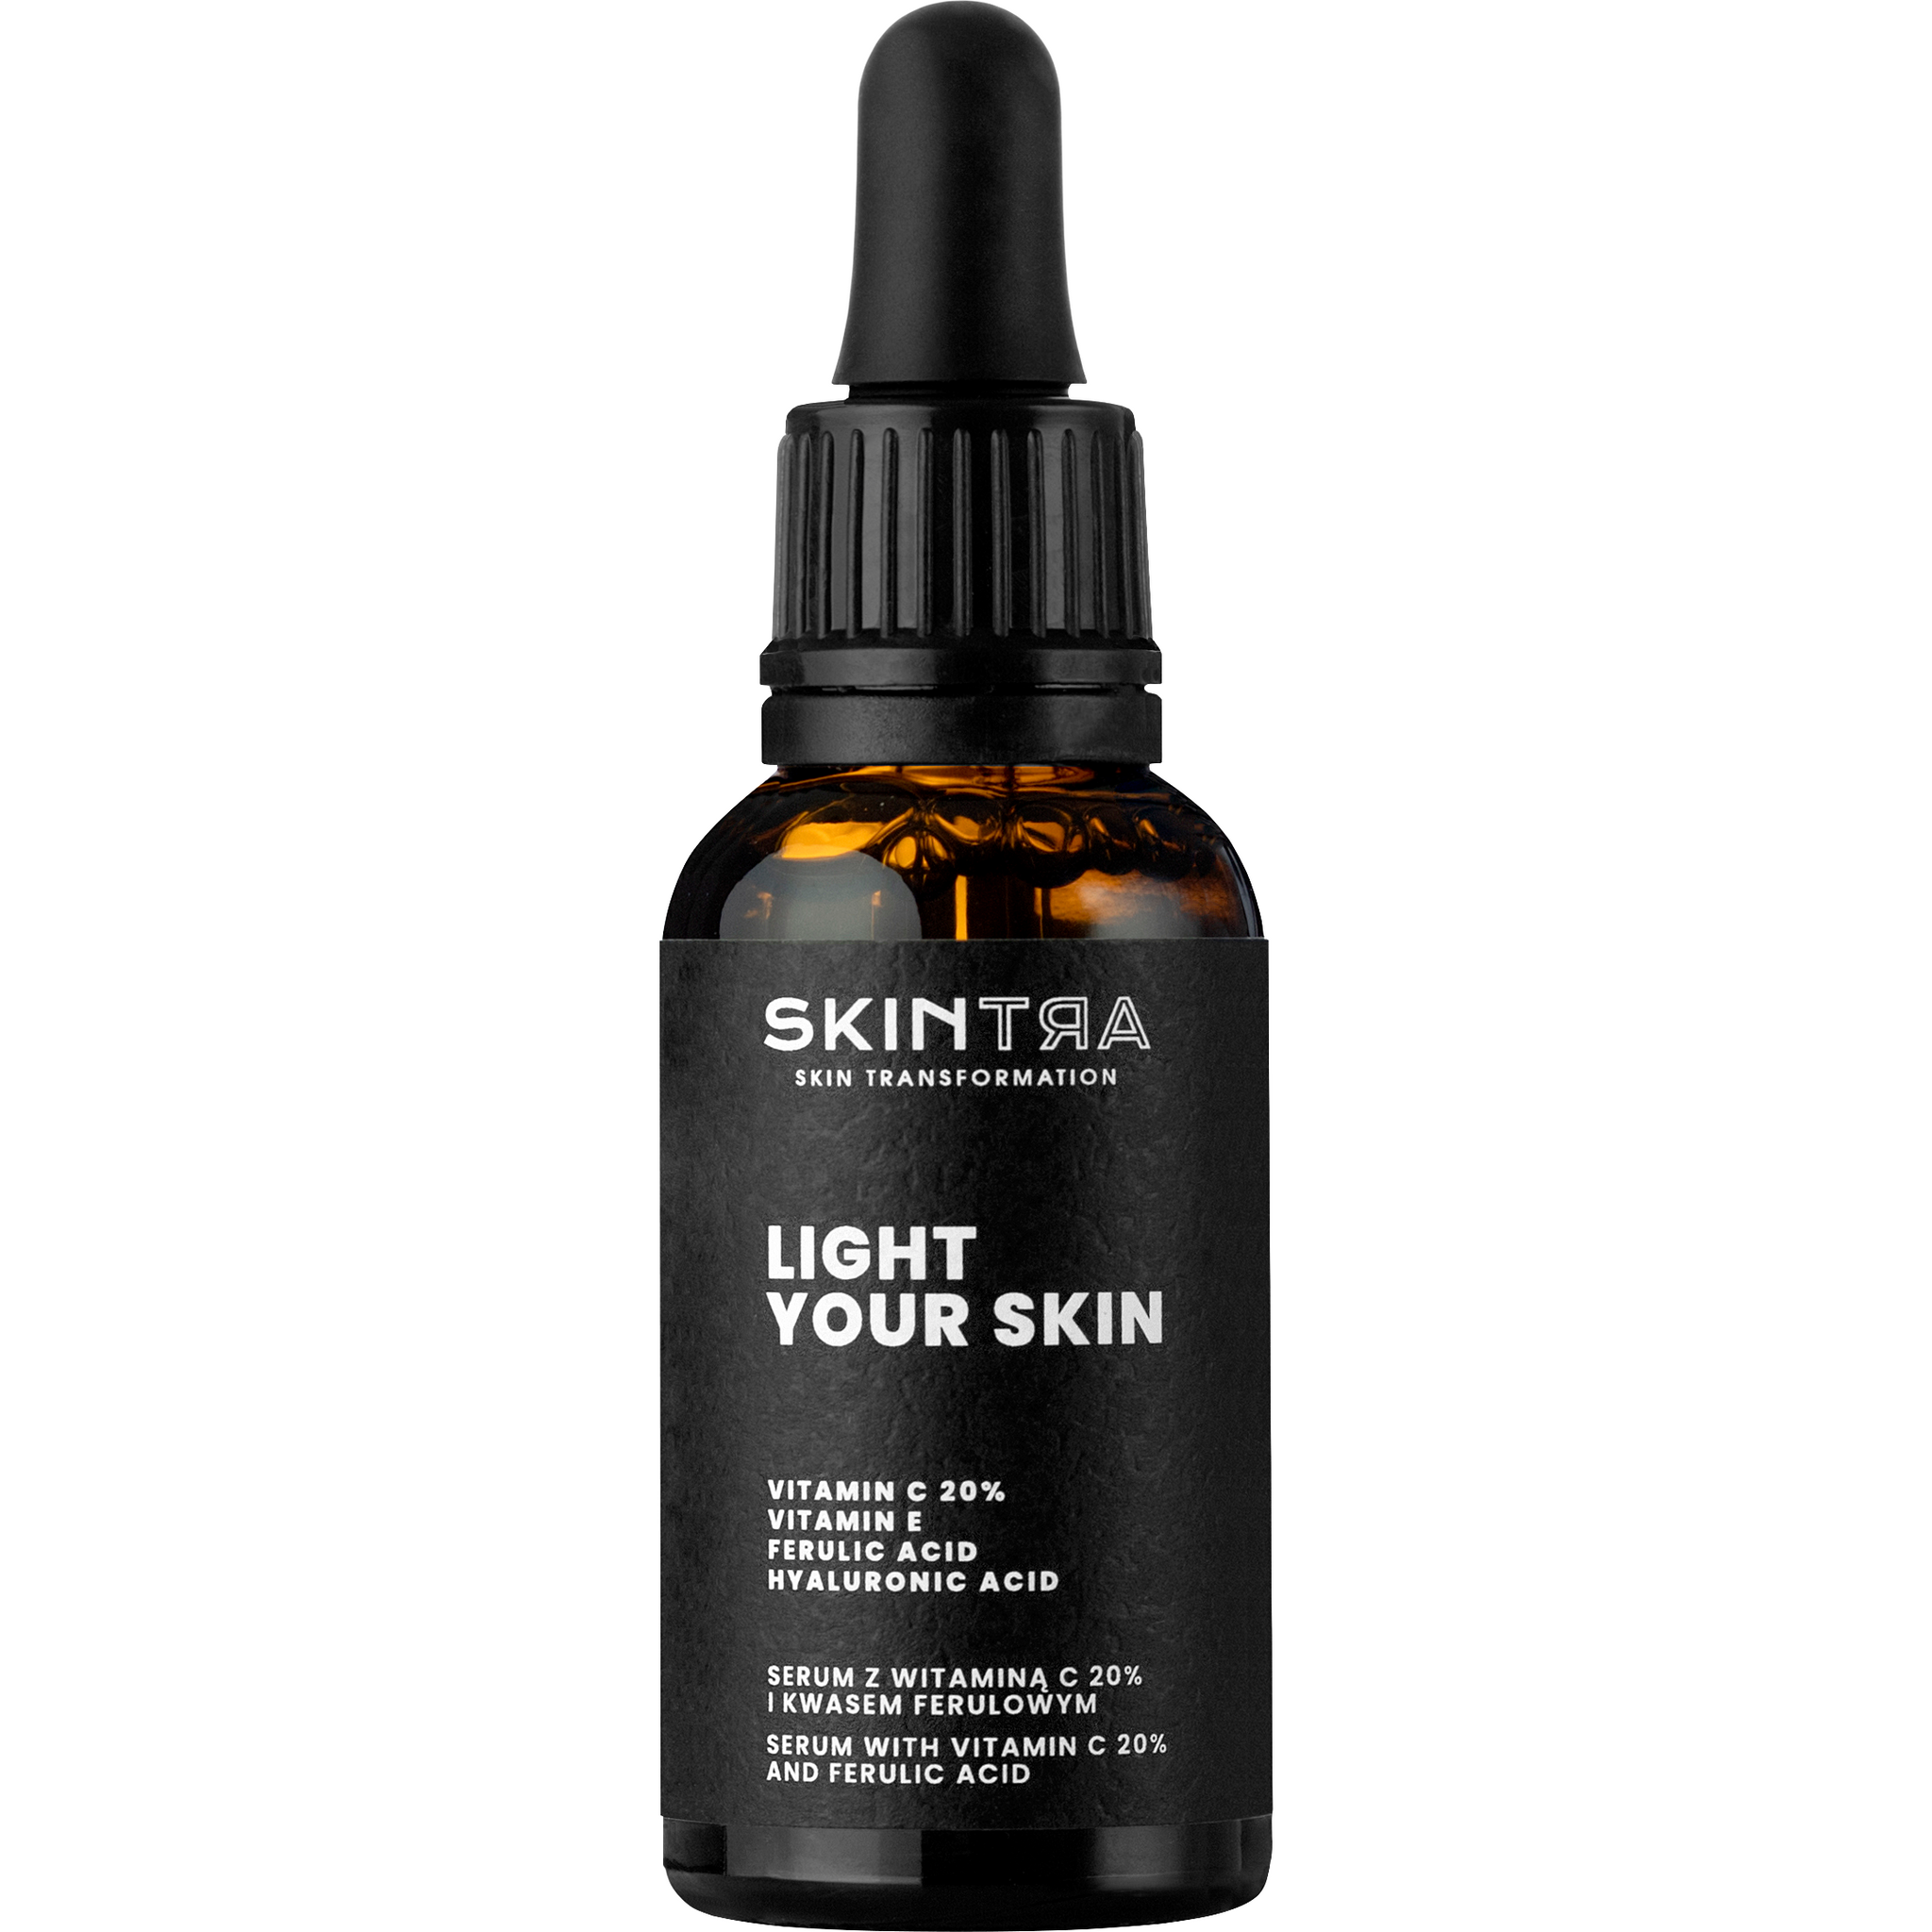 Light Your Skin - Serum with Vitamin C 20% and Ferulic Acid 30ml - Know To Glow